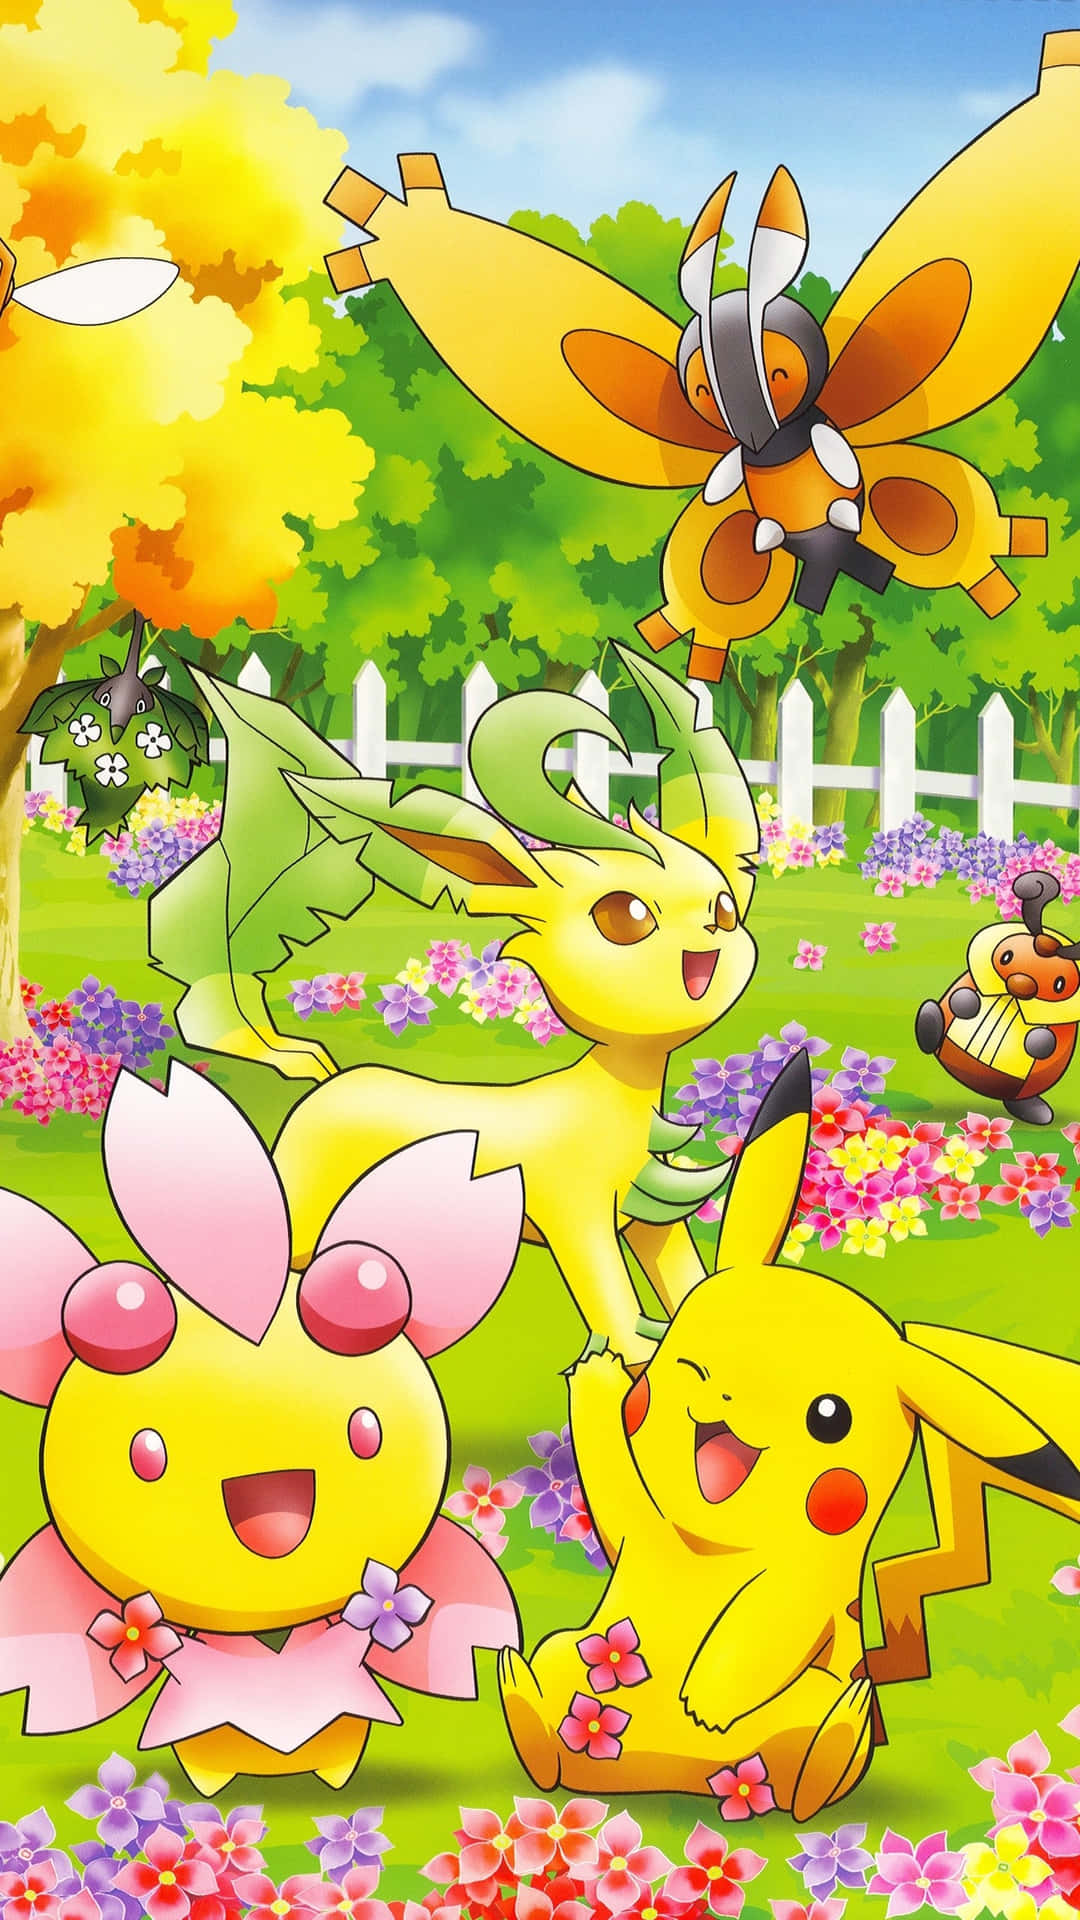 Exciting Pokémon Characters Adventure Wallpaper